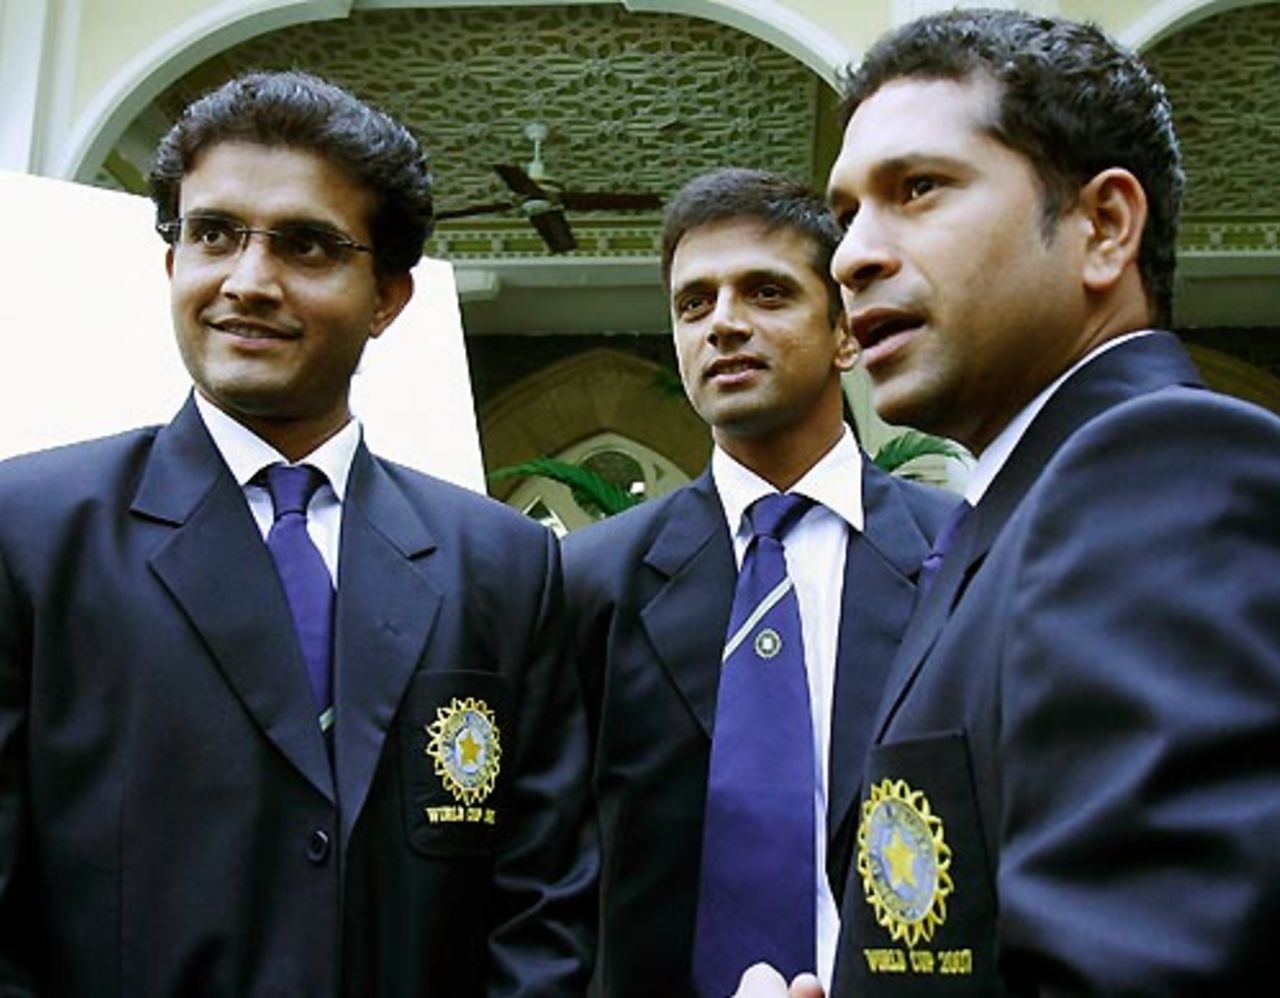 Sourav Ganguly, Rahul Dravid and Sachin Tendulkar pose for photos prior to their departure for the ICC World Cup 2007, Mumbai, February 28, 2007